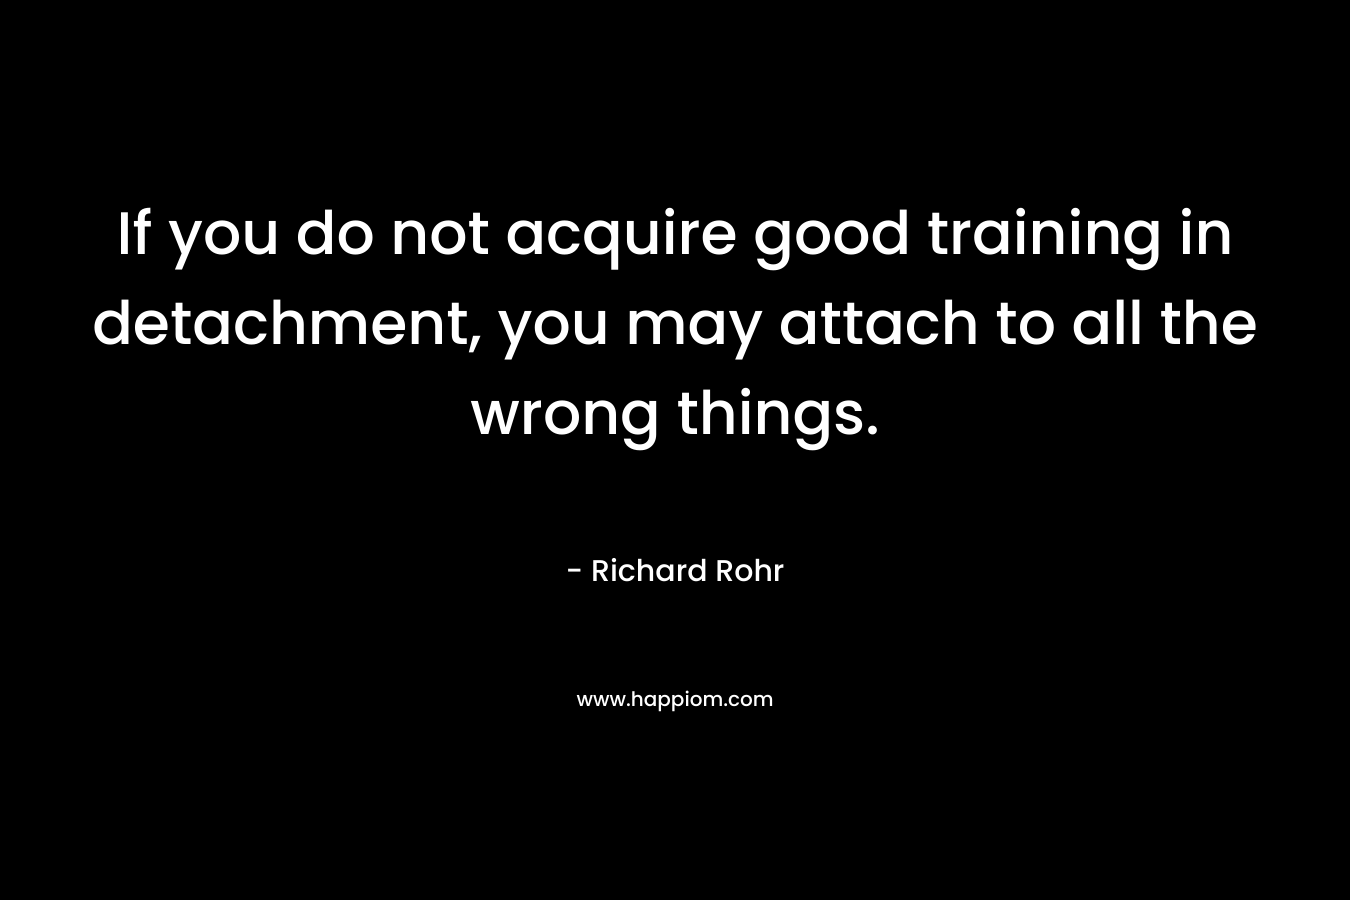 If you do not acquire good training in detachment, you may attach to all the wrong things. – Richard Rohr